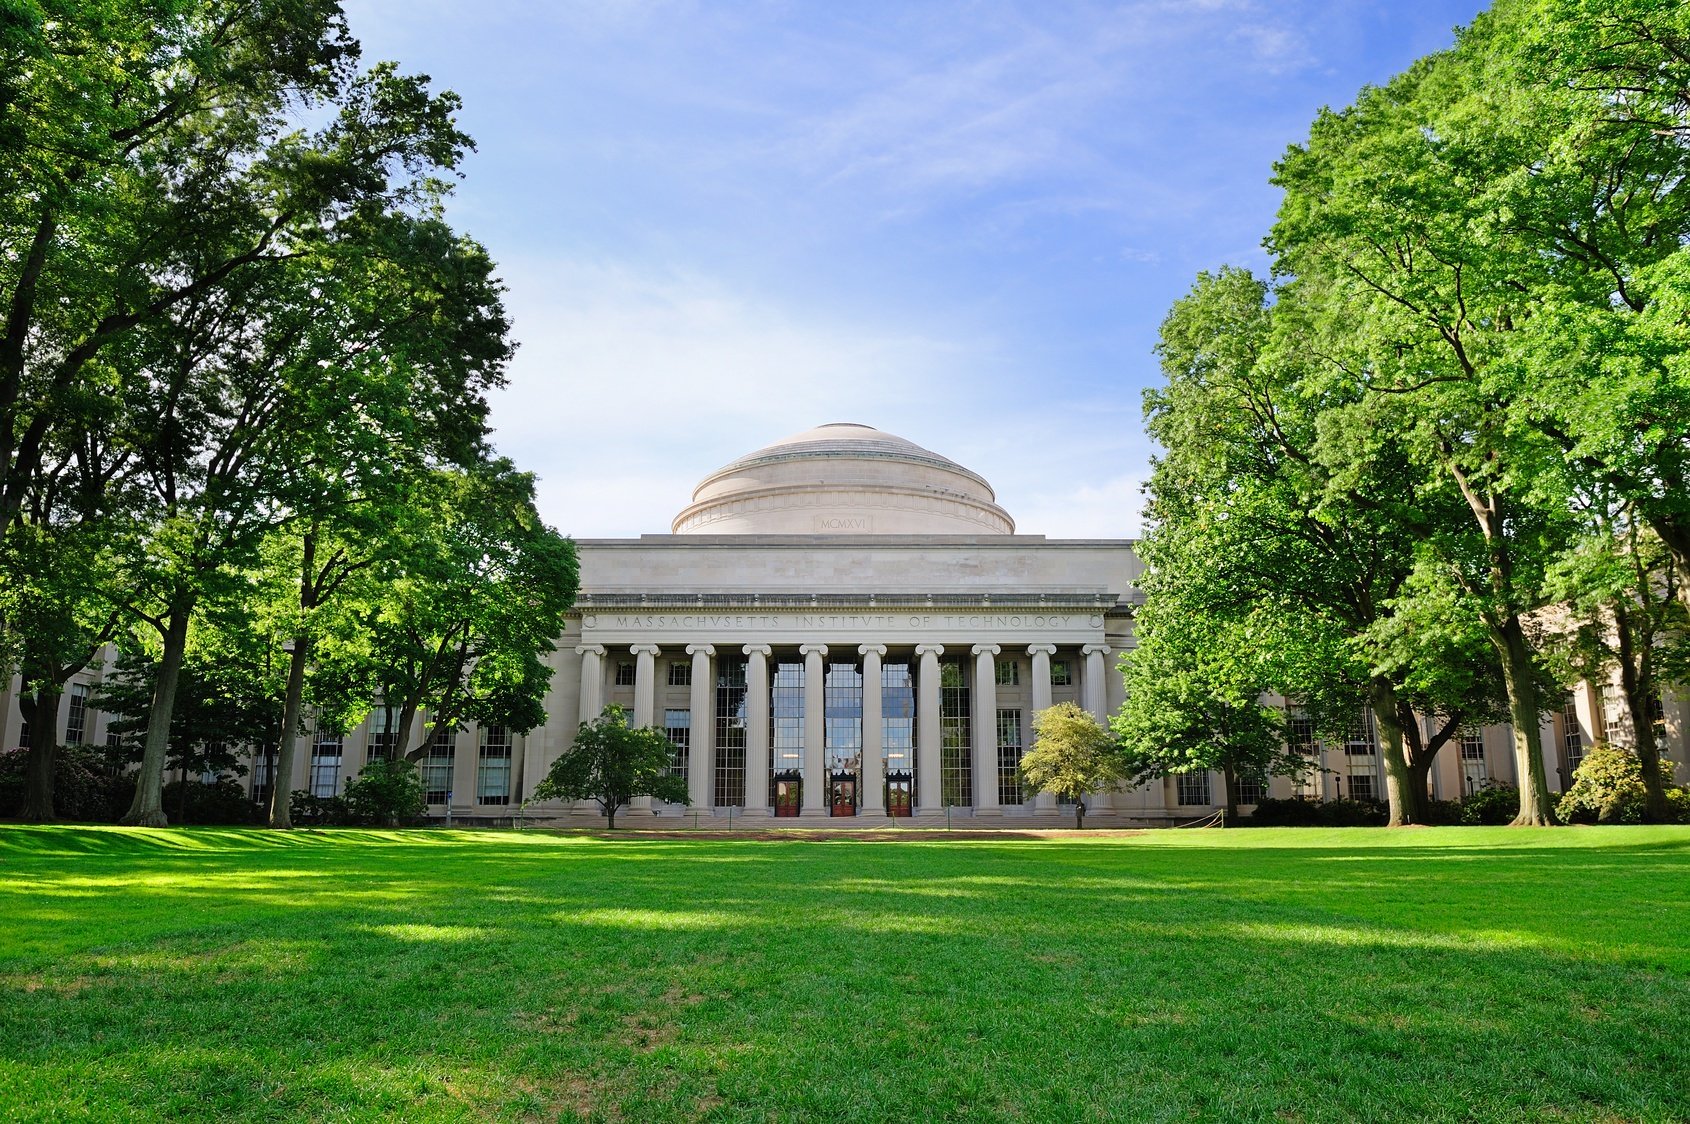 How to Get Into MIT: All You Need to Know